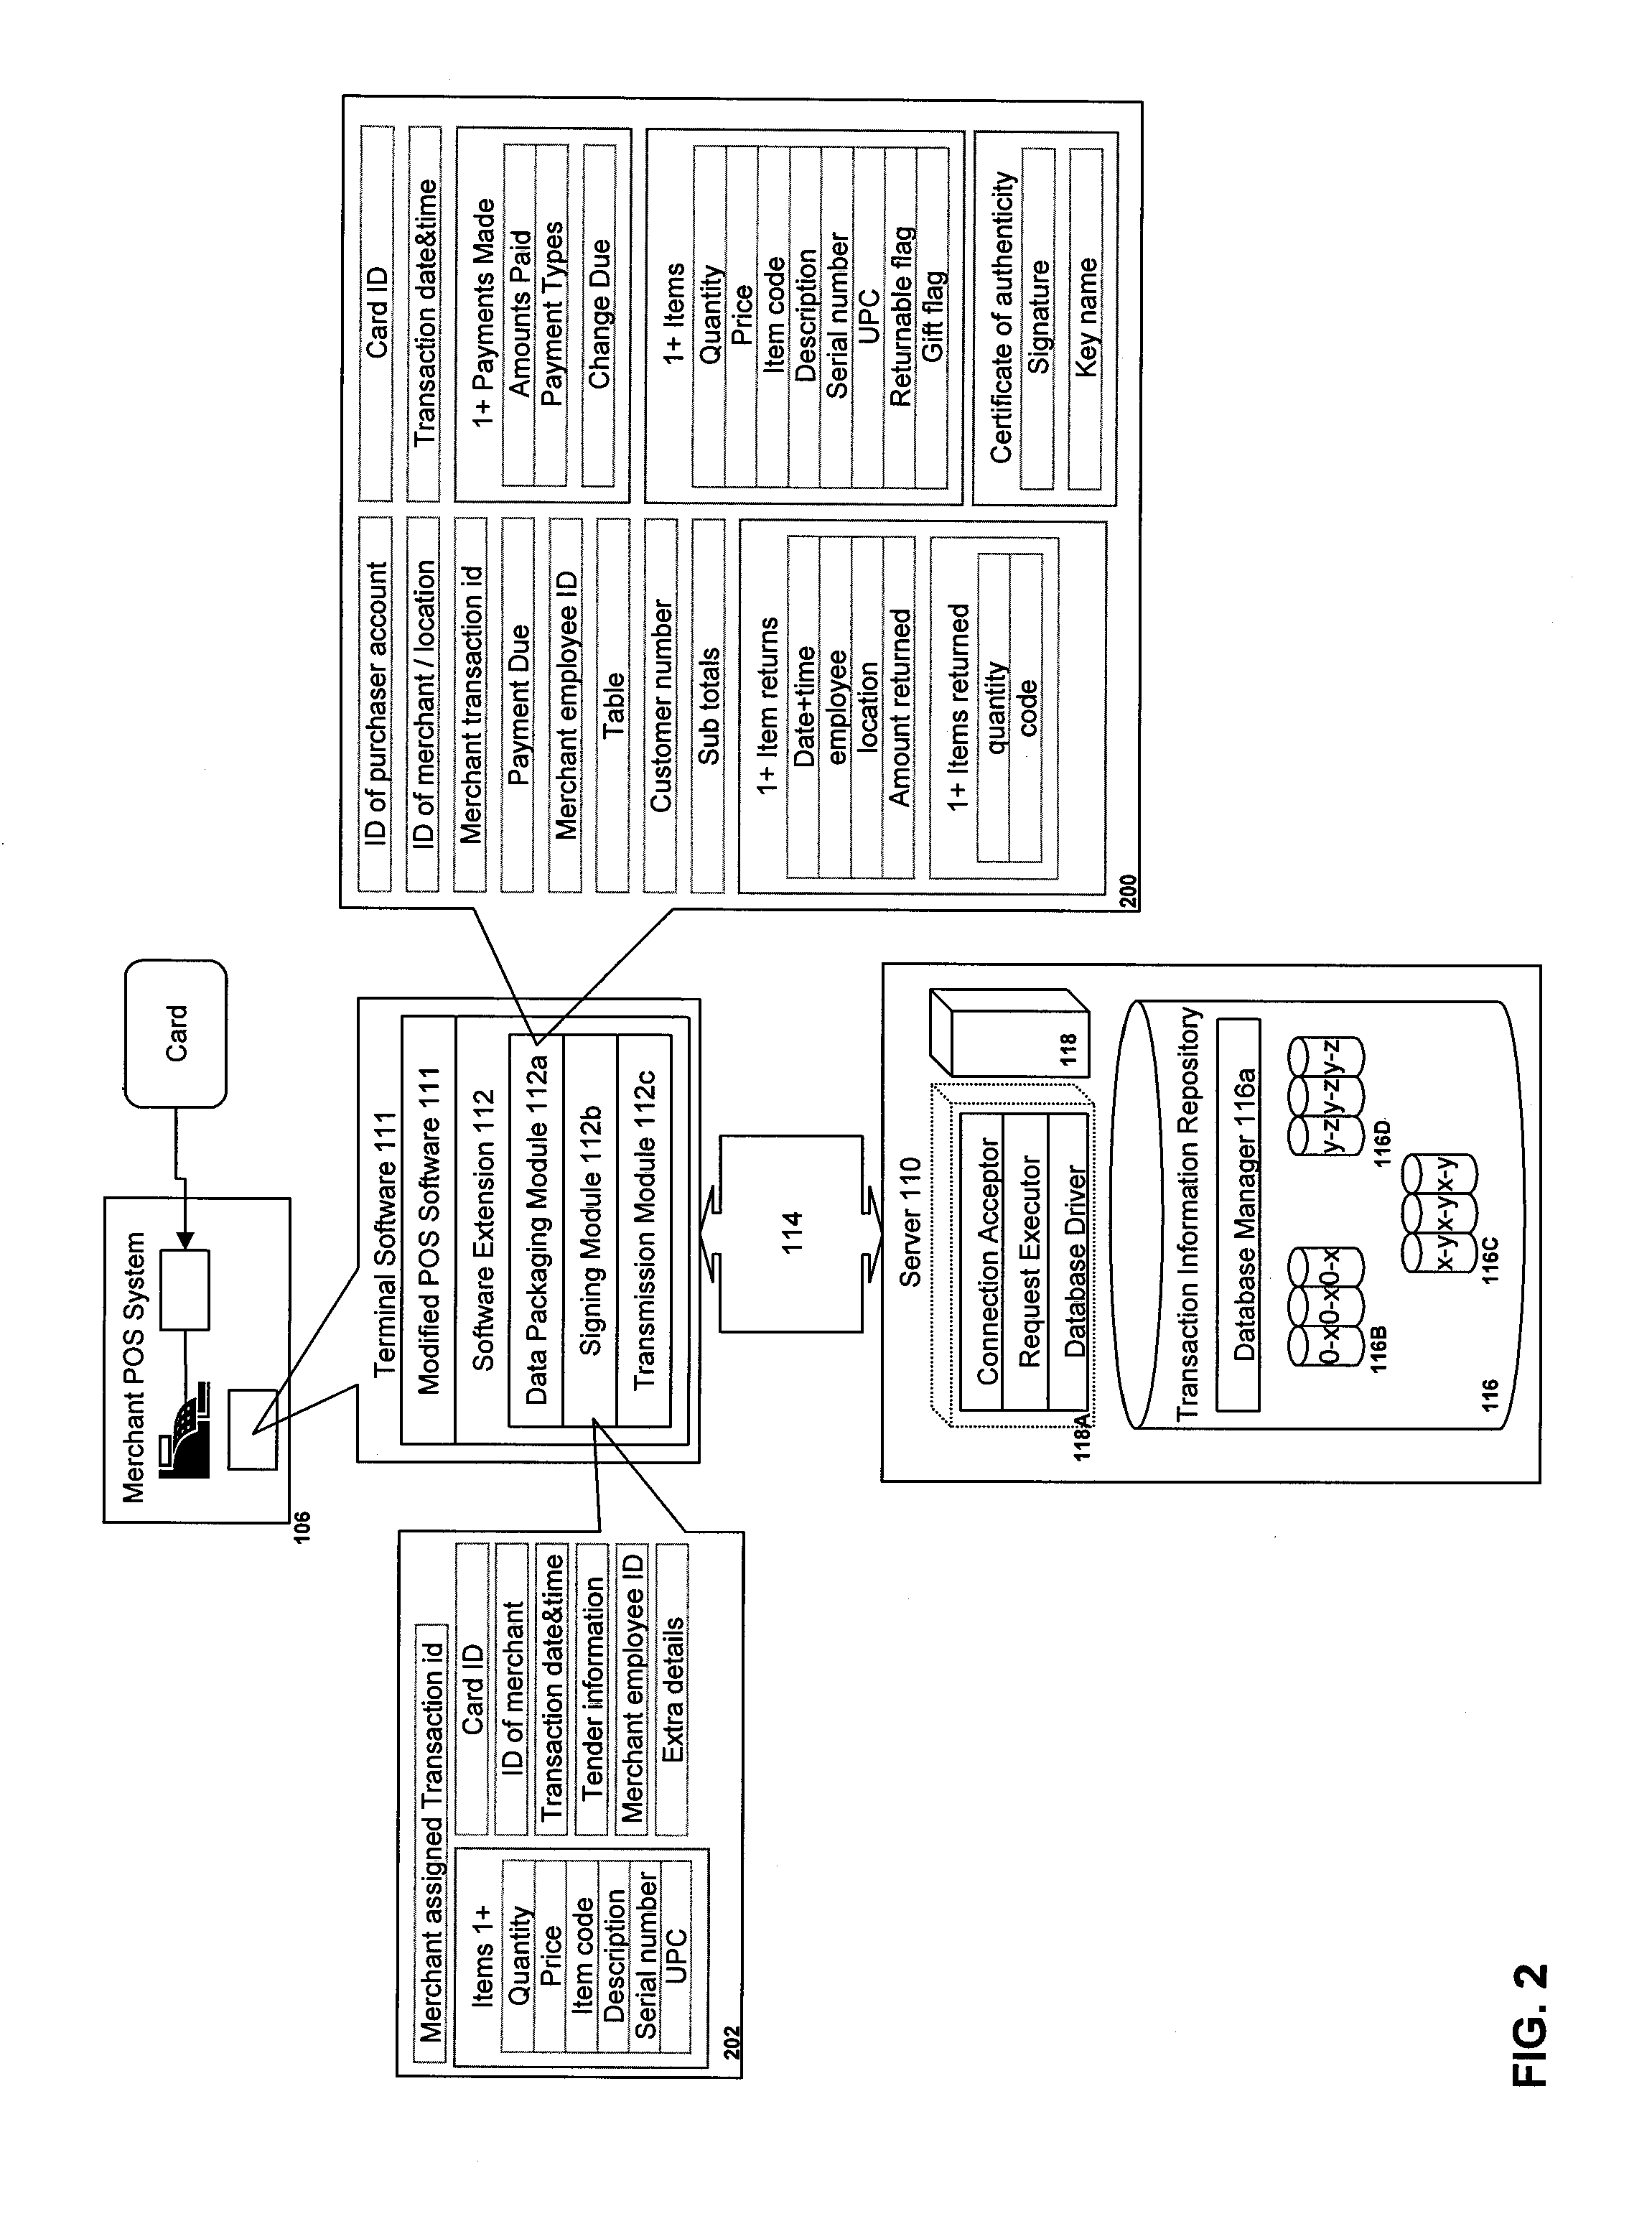 System and method for tracking transaction records in a network